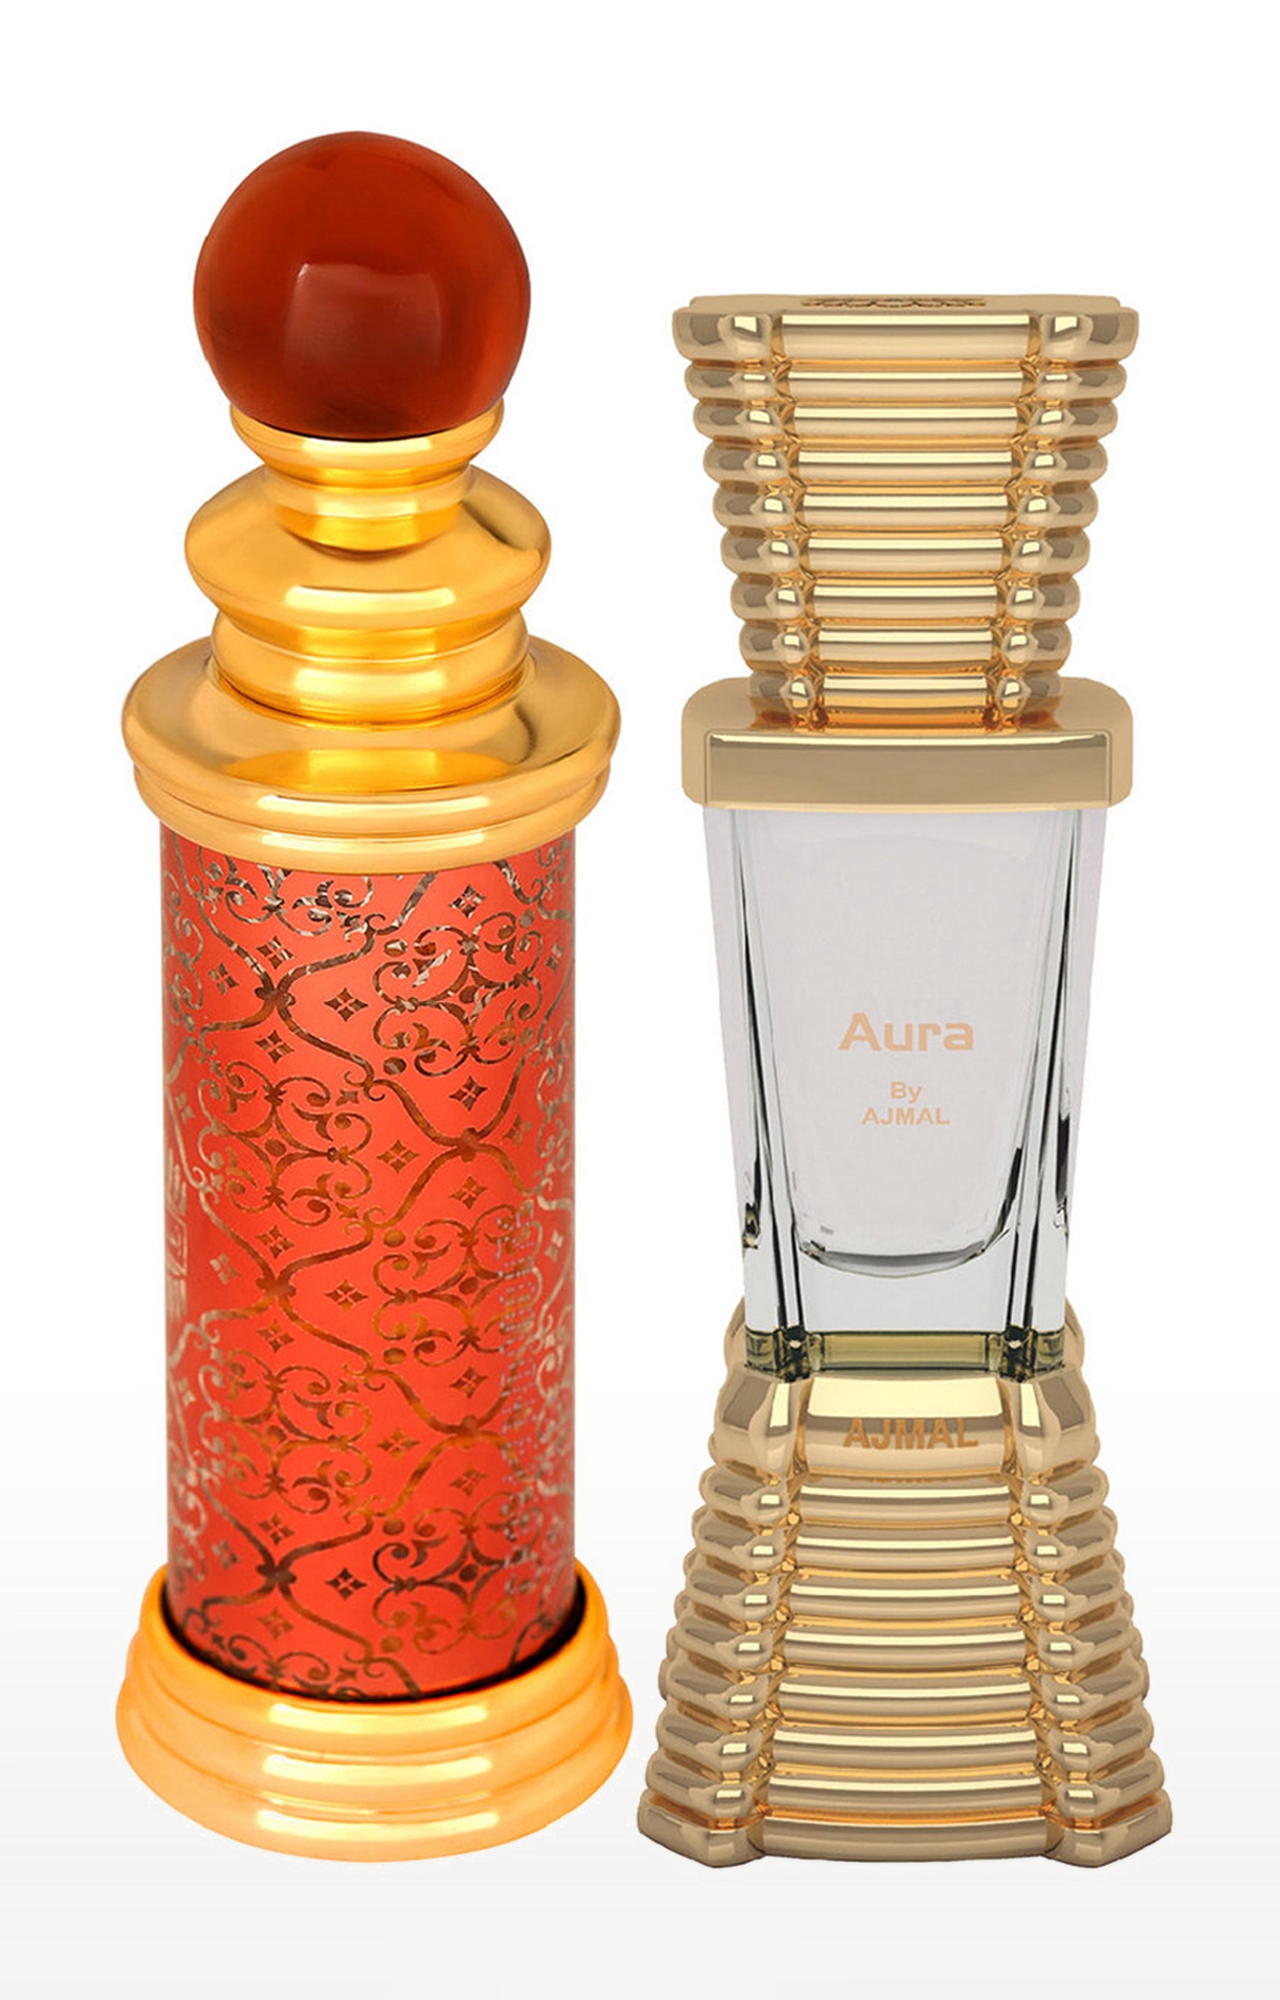 Ajmal | Ajmal Classic Oud Concentrated Perfume Oil Woody Oudh Alcohol- Attar 10Ml For Unisex And Aura Concentrated Perfume Oil Floral Fruity Alcohol- Attar 10Ml For Unisex 